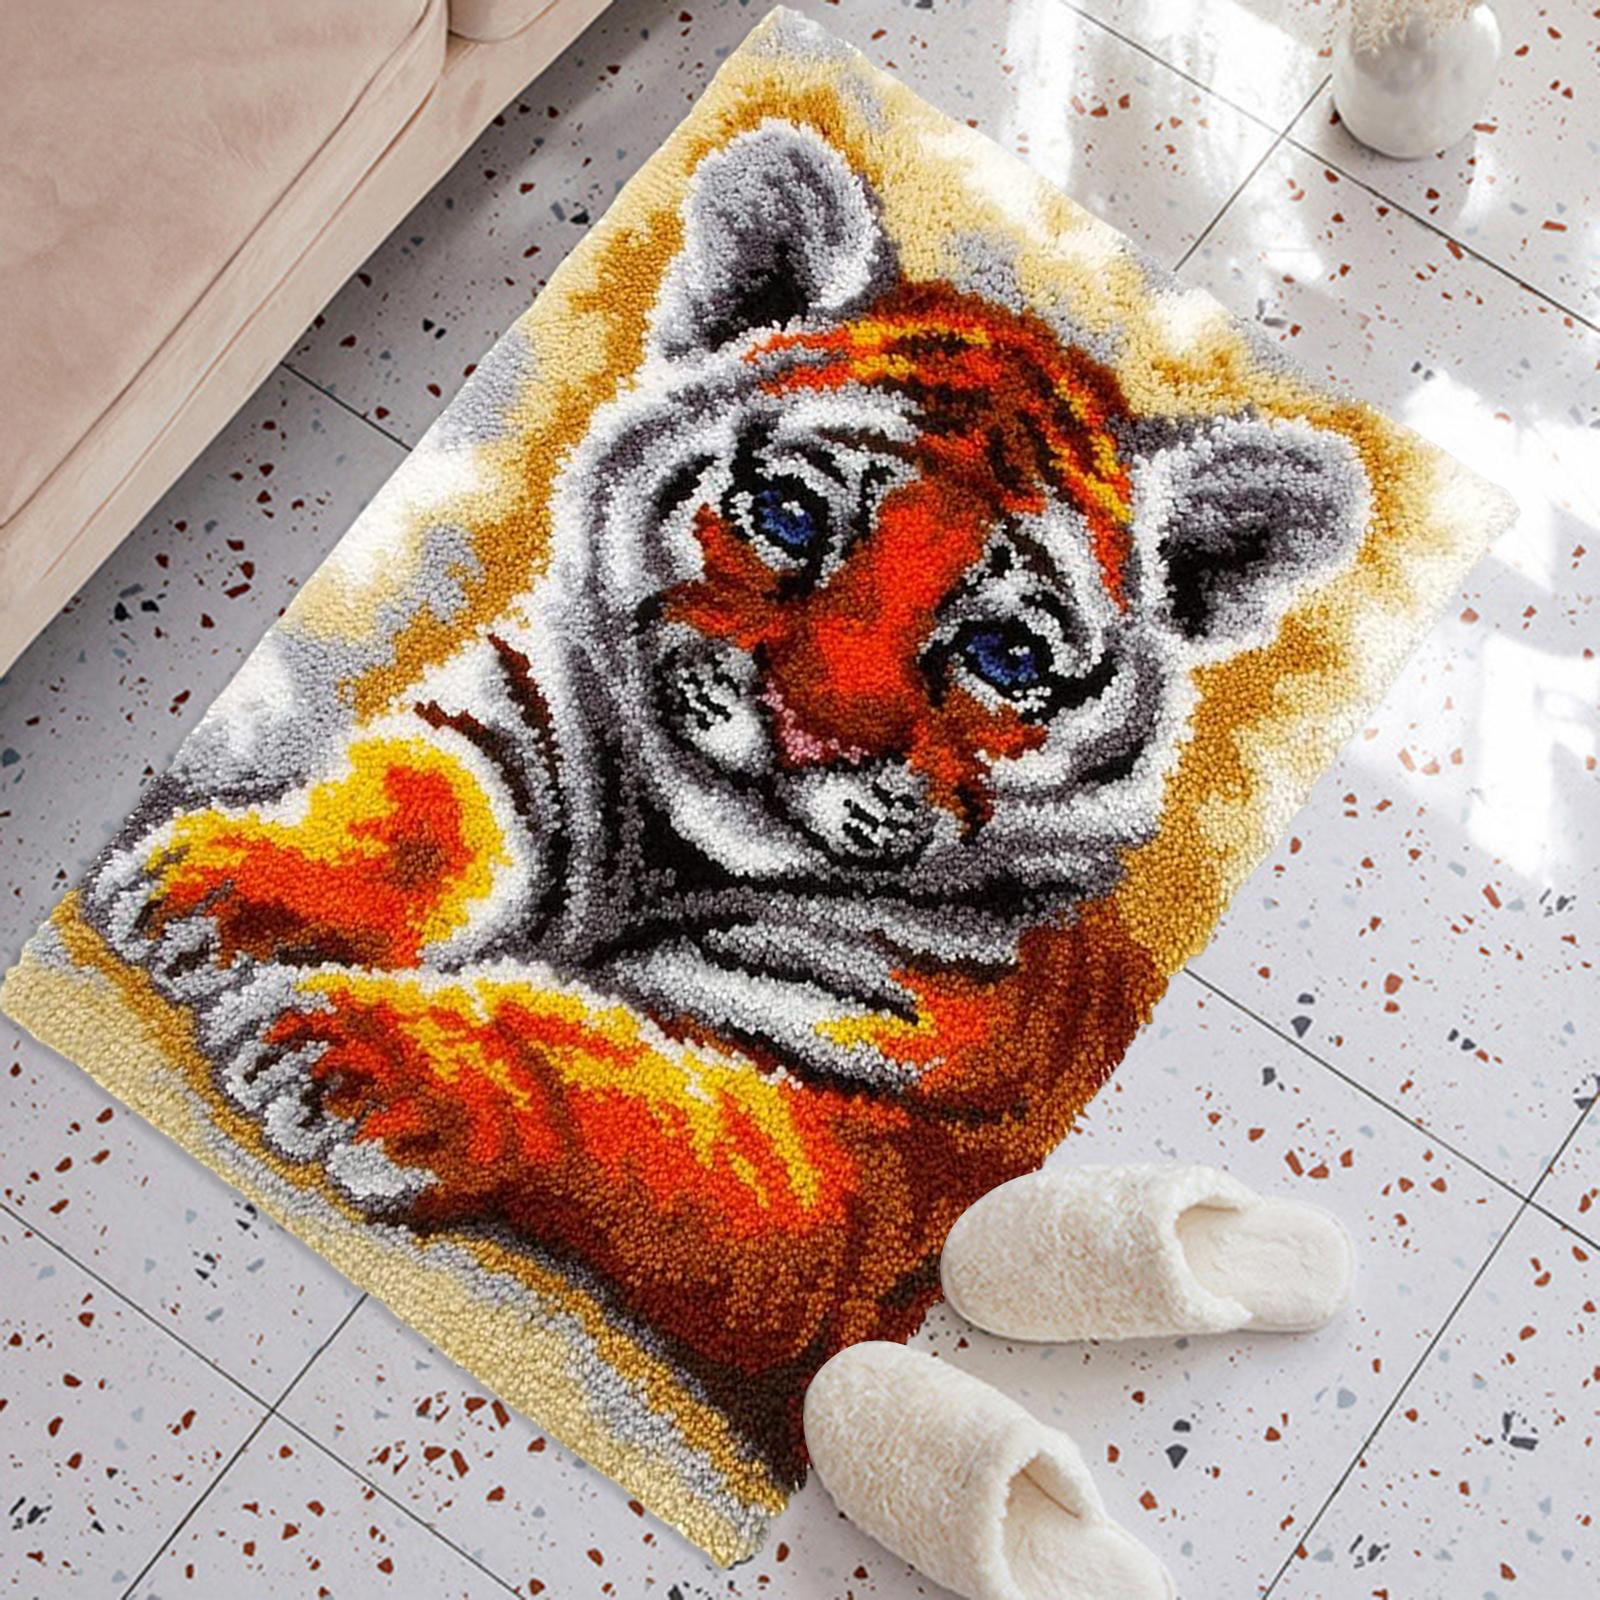 Latch Hook Kits for Adults - Cats Welcome Rug Kits 24x16 in, DIY Latch Hook Rug Kit, Cross Stitch Rug Making Kit, Carpet Making Crochet Kits